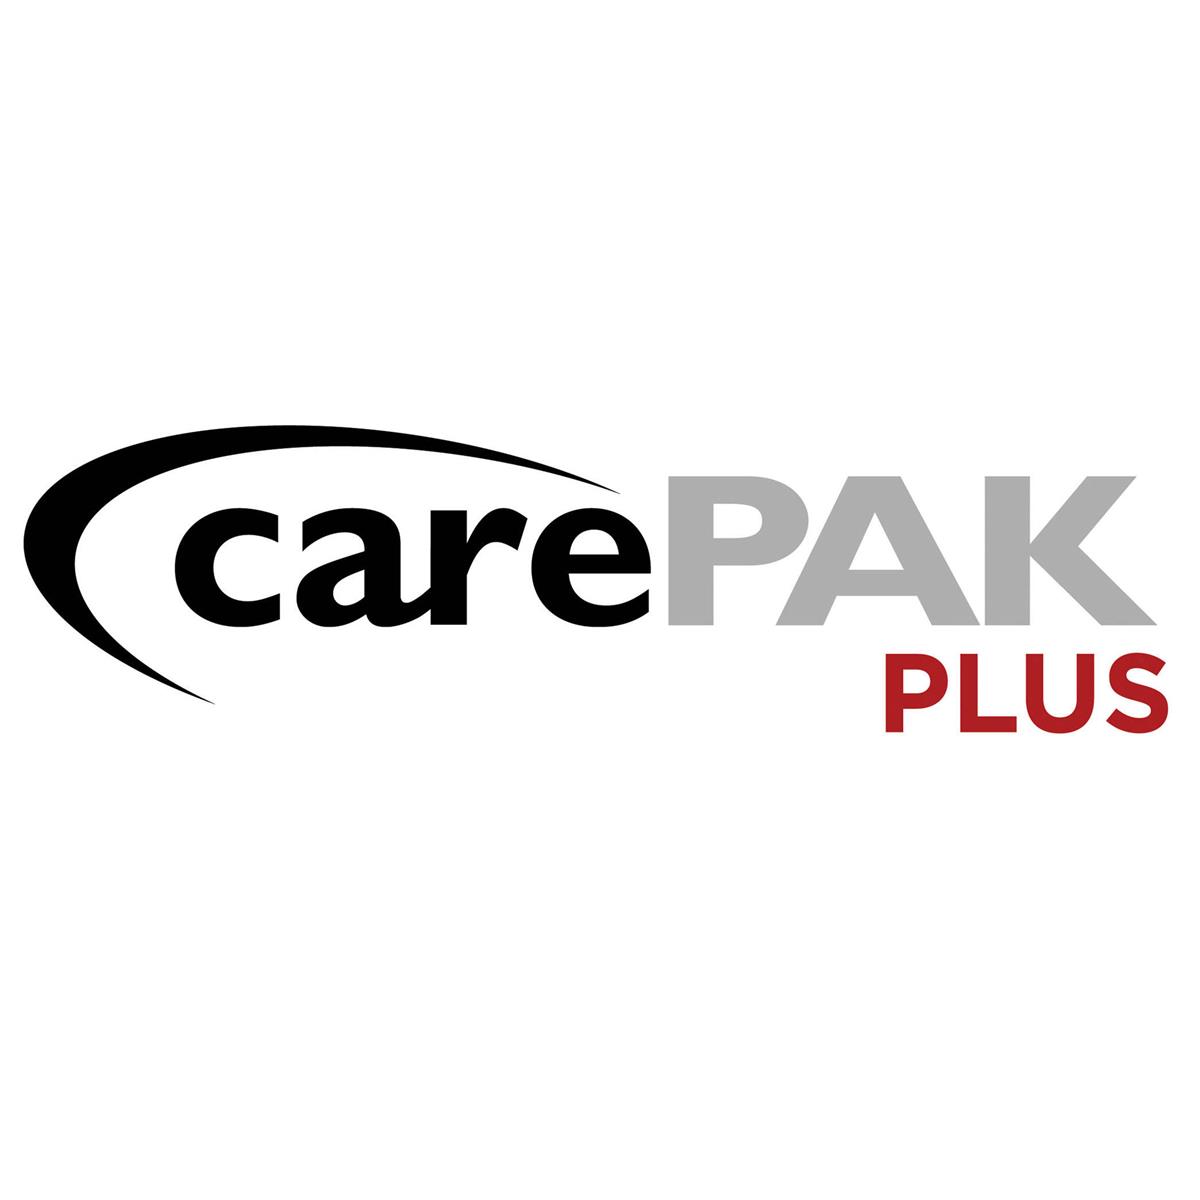 Canon CarePAK PLUS 2 Year Plan for Video Cameras (Up to $1500) -  9619B014AA